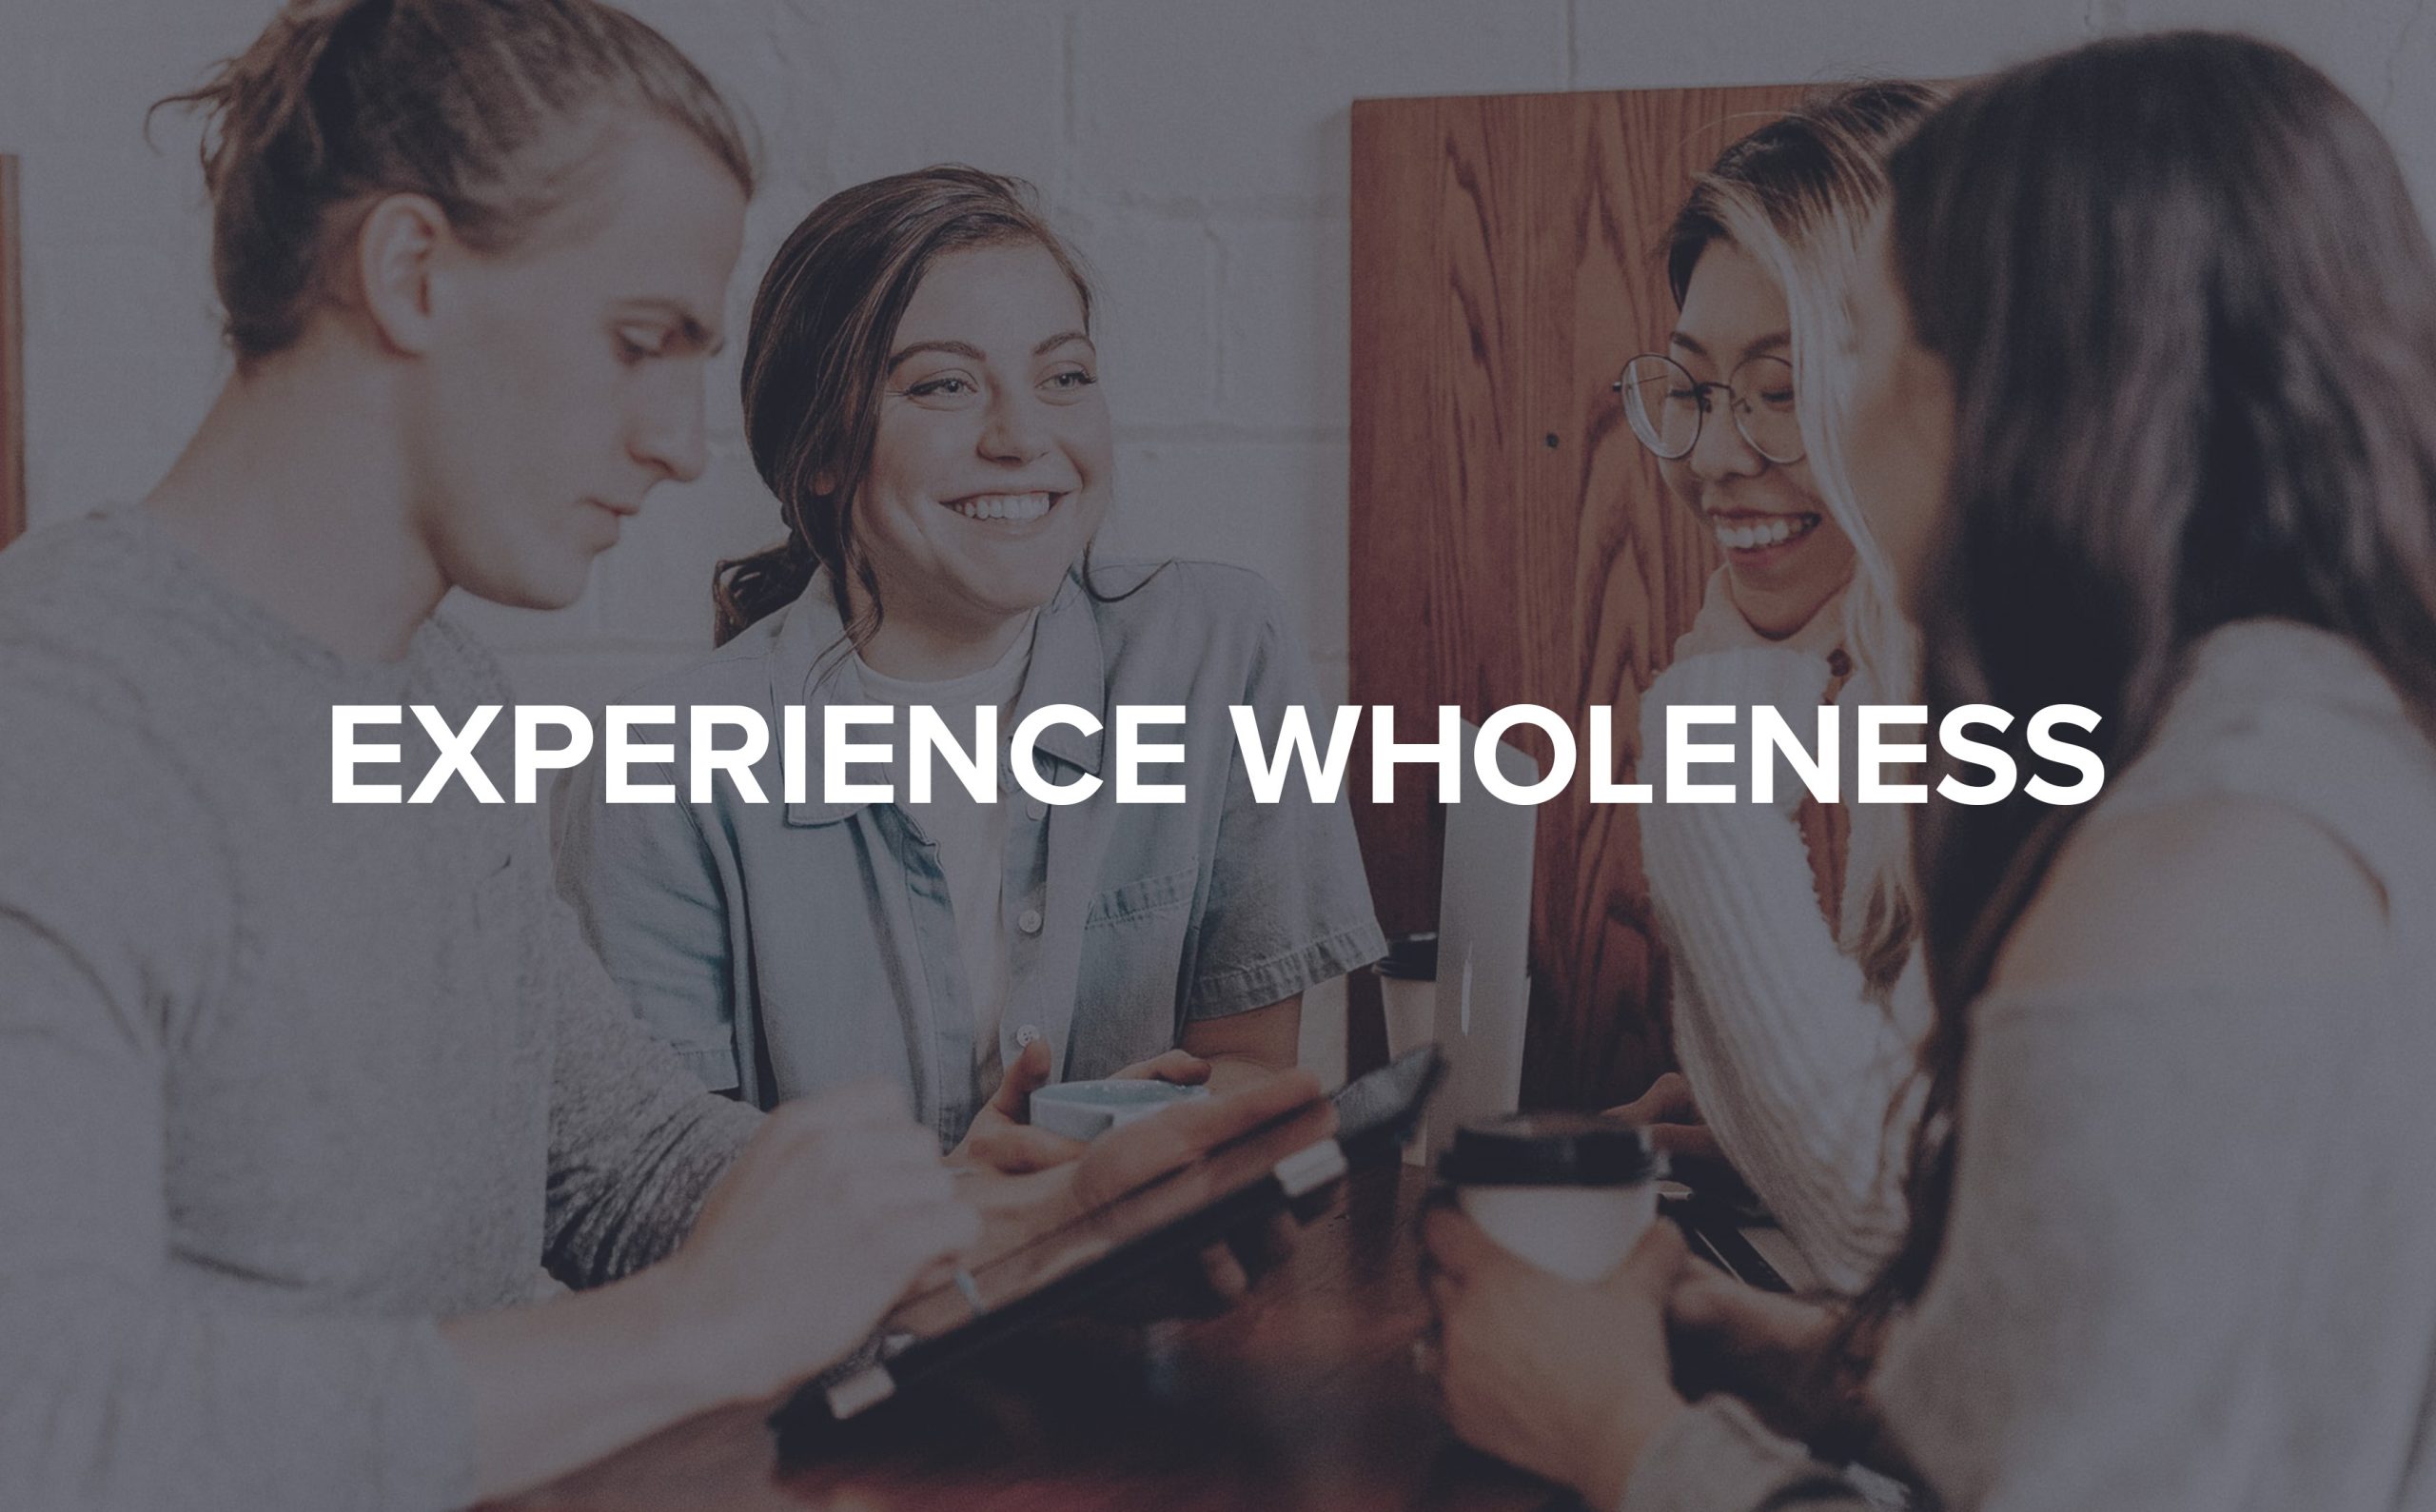 Experiencing Wholeness